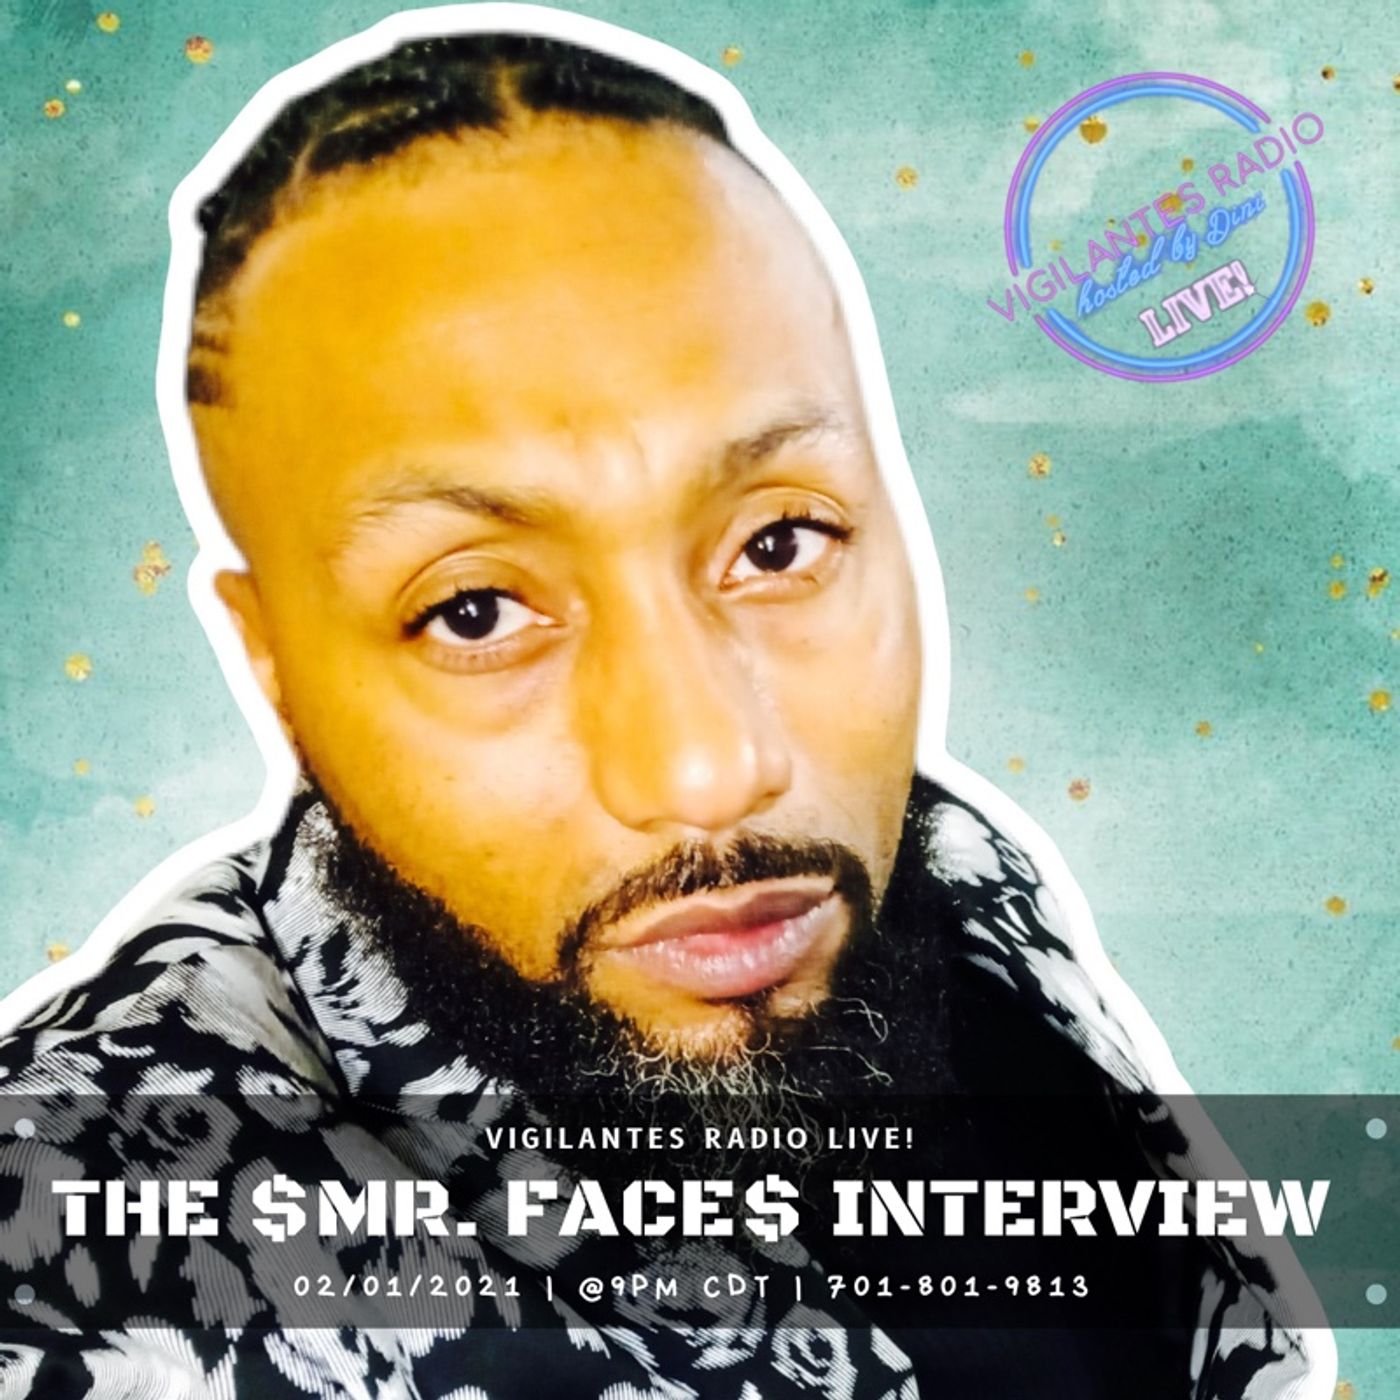 The $Mr. Face$ Interview. Image